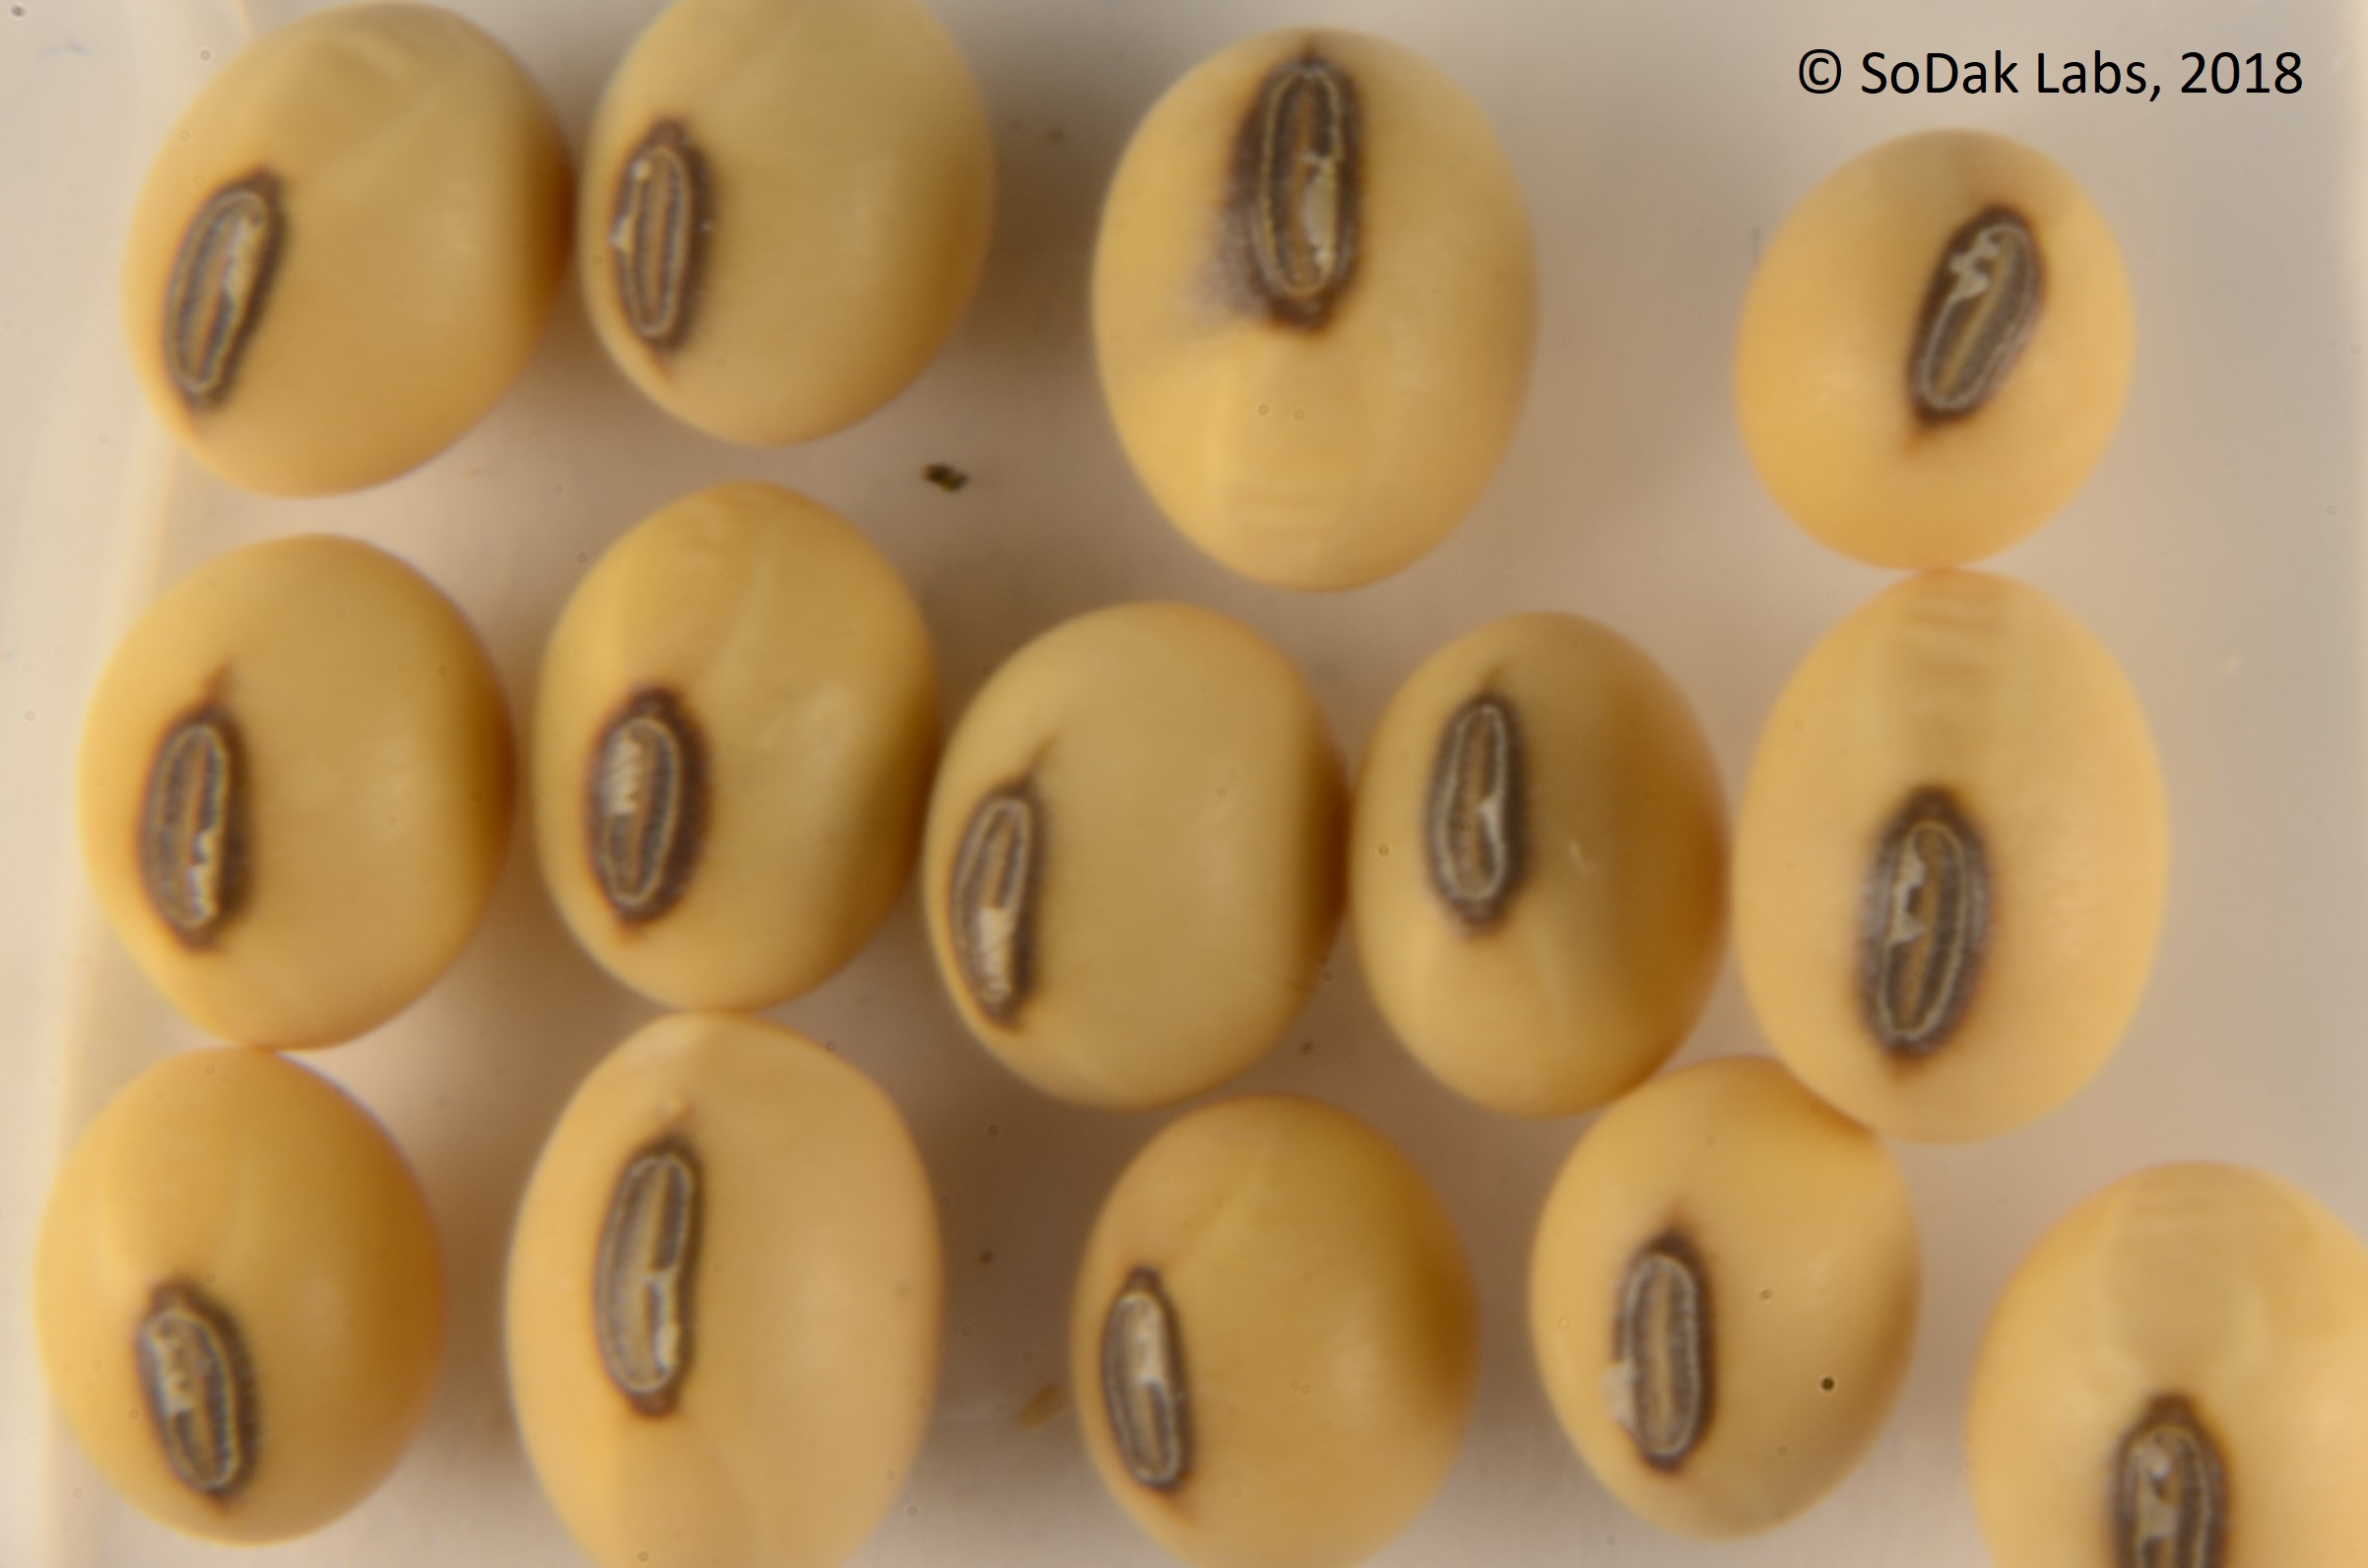 Soybean hilium colors being evaluated